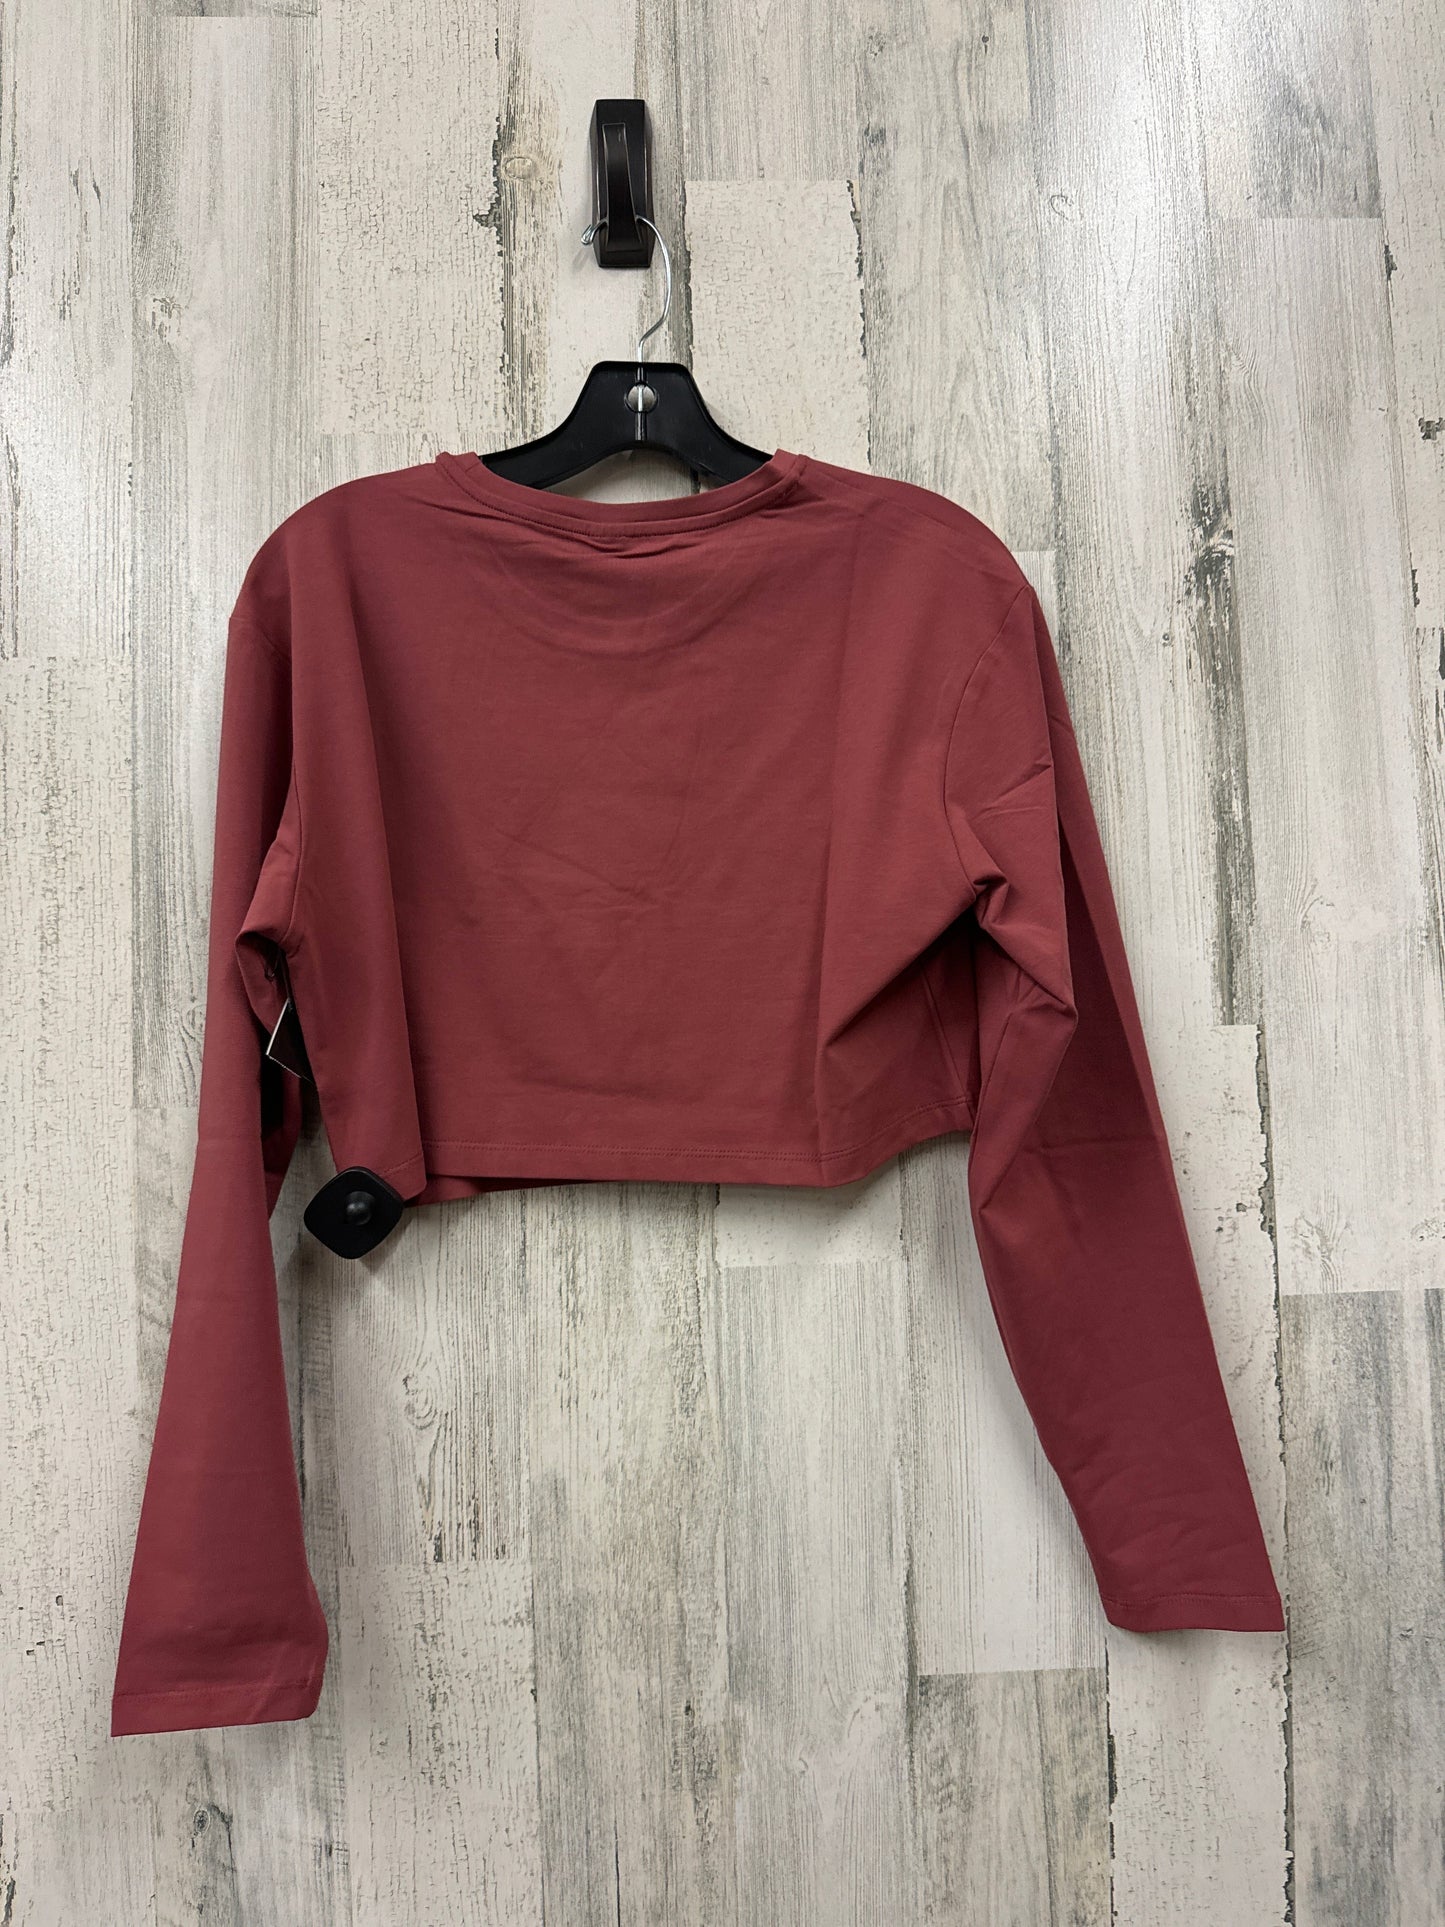 Red Athletic Top Long Sleeve Crewneck Clothes Mentor, Size Xs